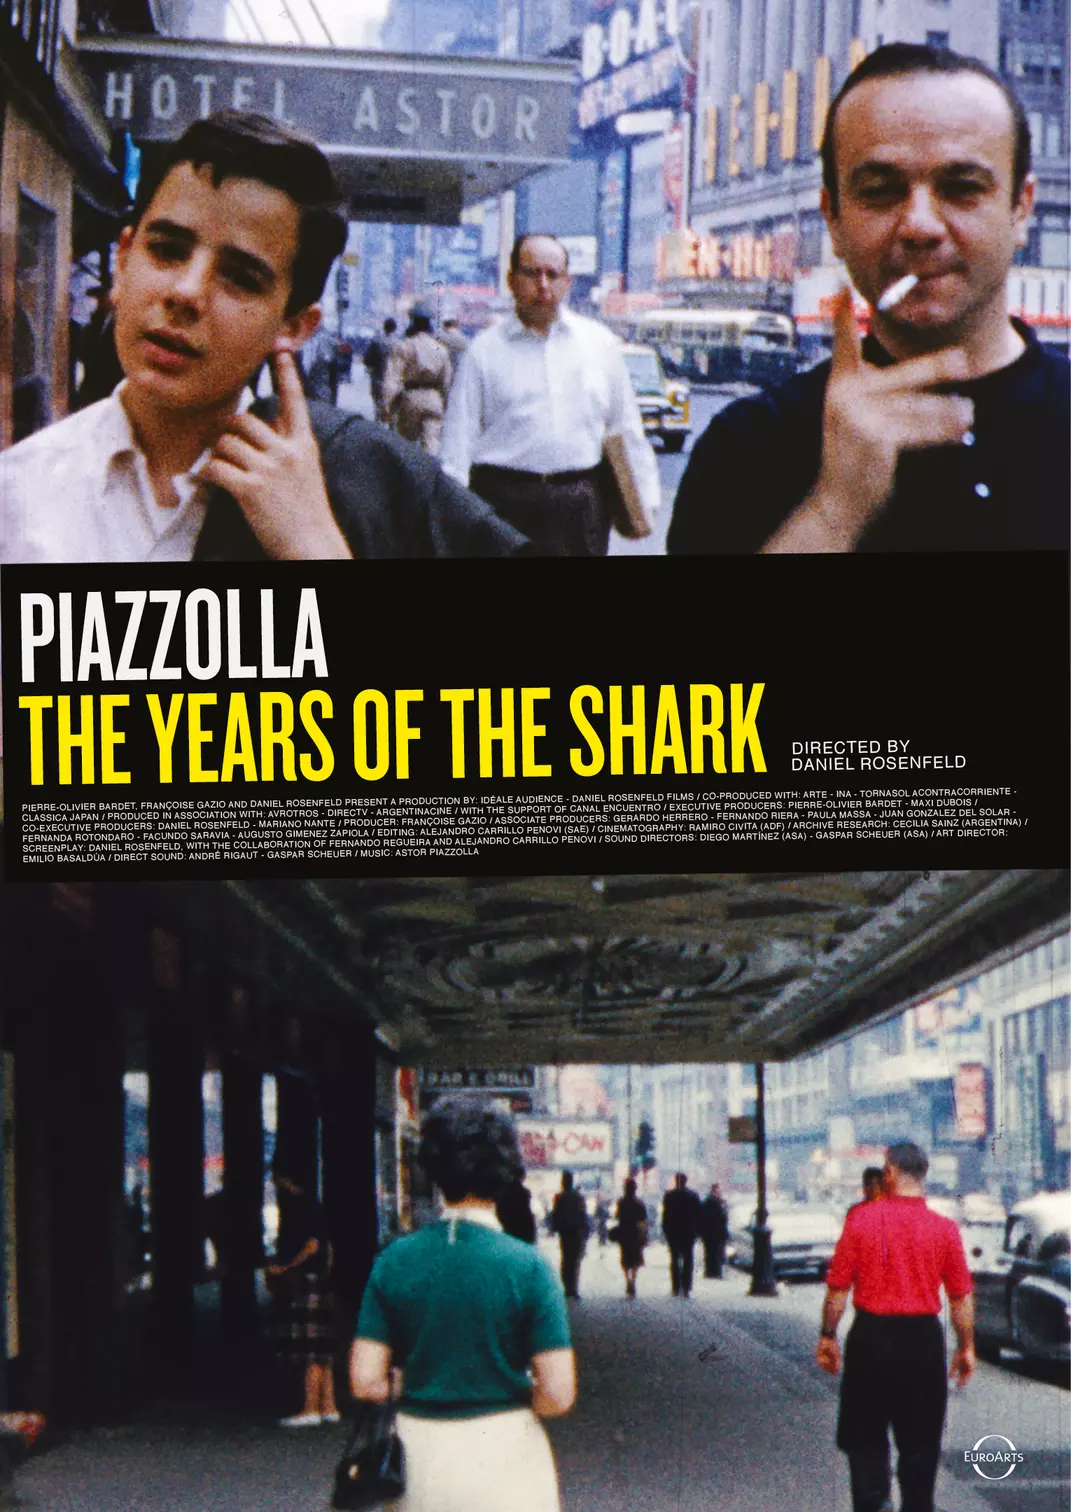 Astor Piazzolla - The Years of the Shark - Documentary